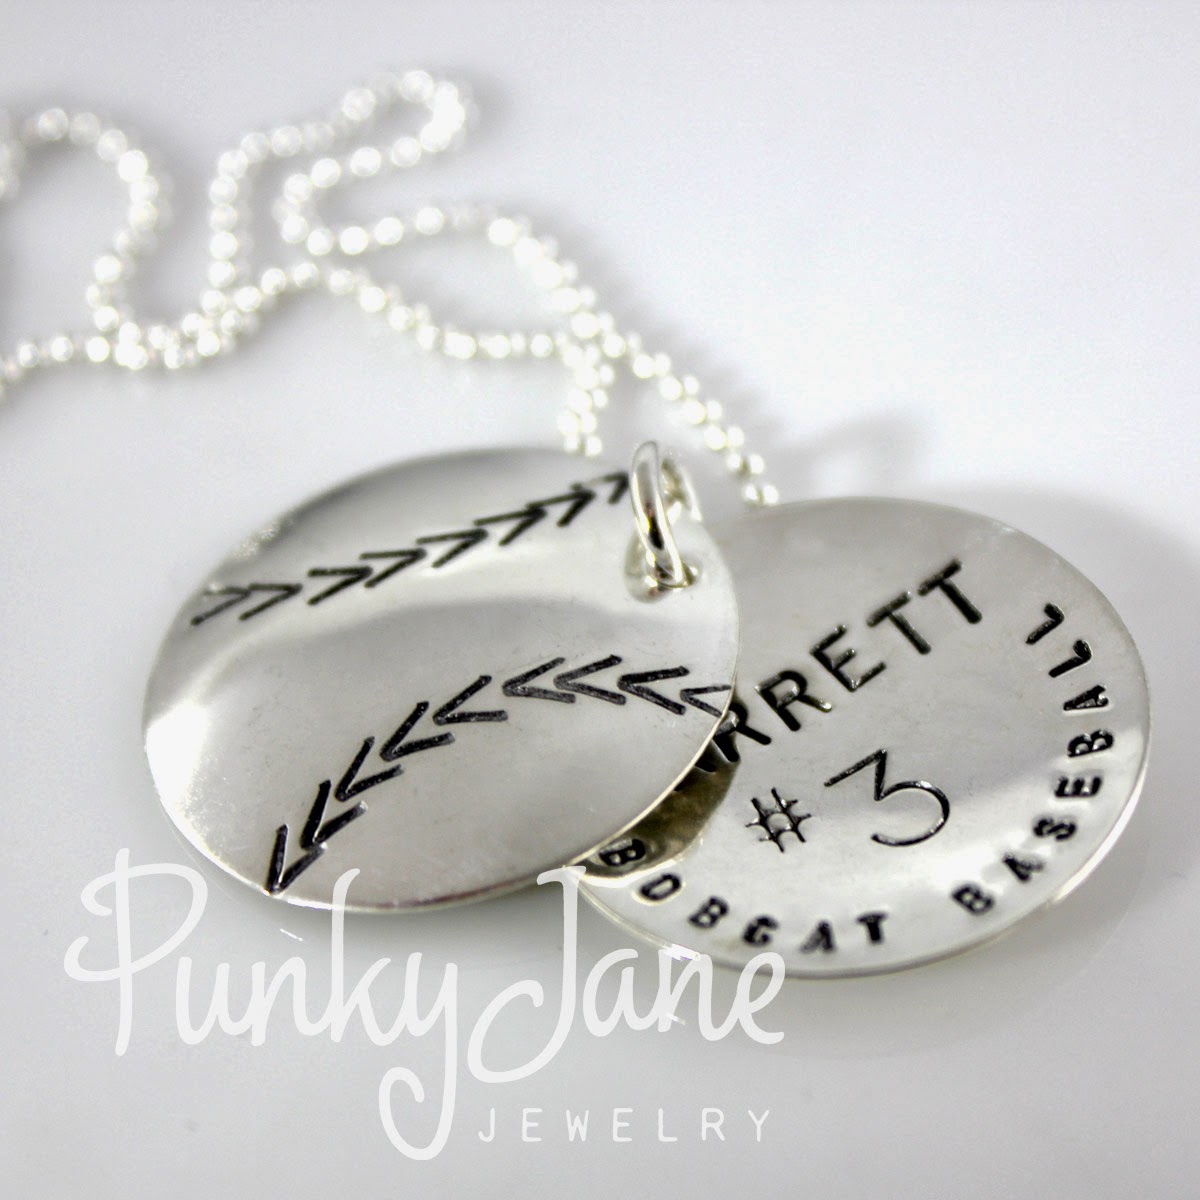 http://shop.punkyjane.com/Large-Baseball-hand-stamped-and-personalized-faux-locket-4515.htm